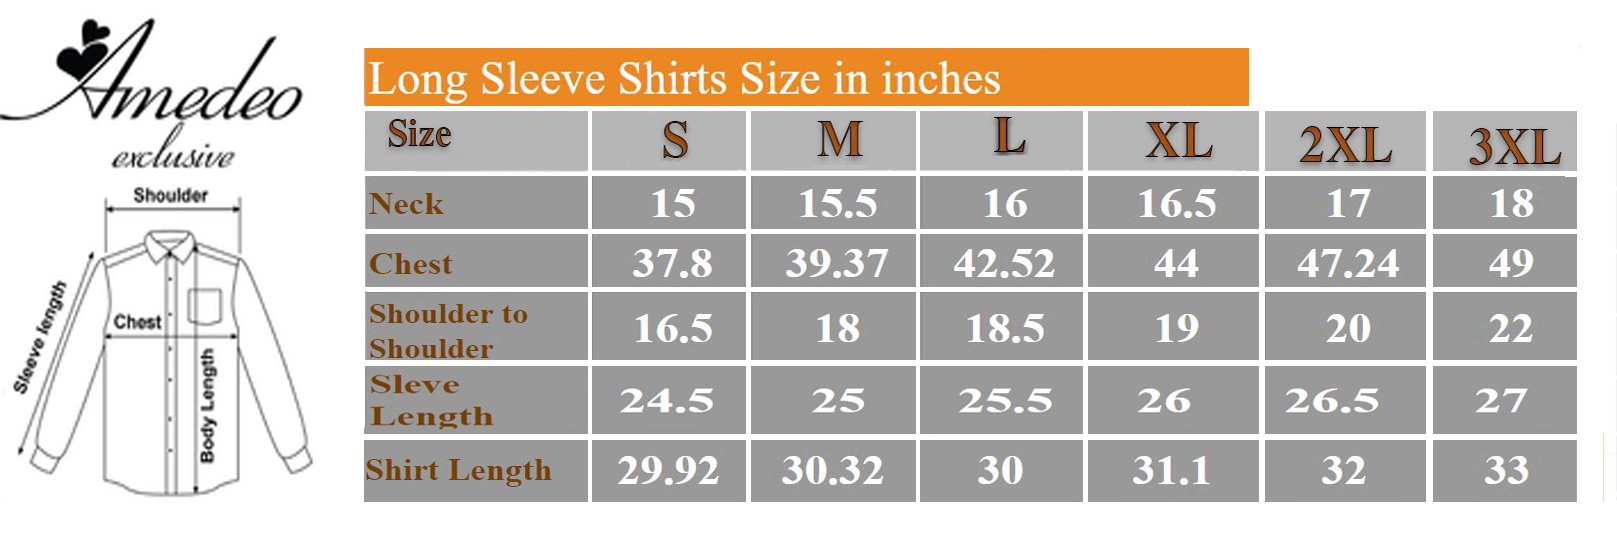 Black Blue Orange Mens Slim Fit Designer Dress Shirt - tailored Cotton Shirts for Work and Casual Wear - Amedeo Exclusive